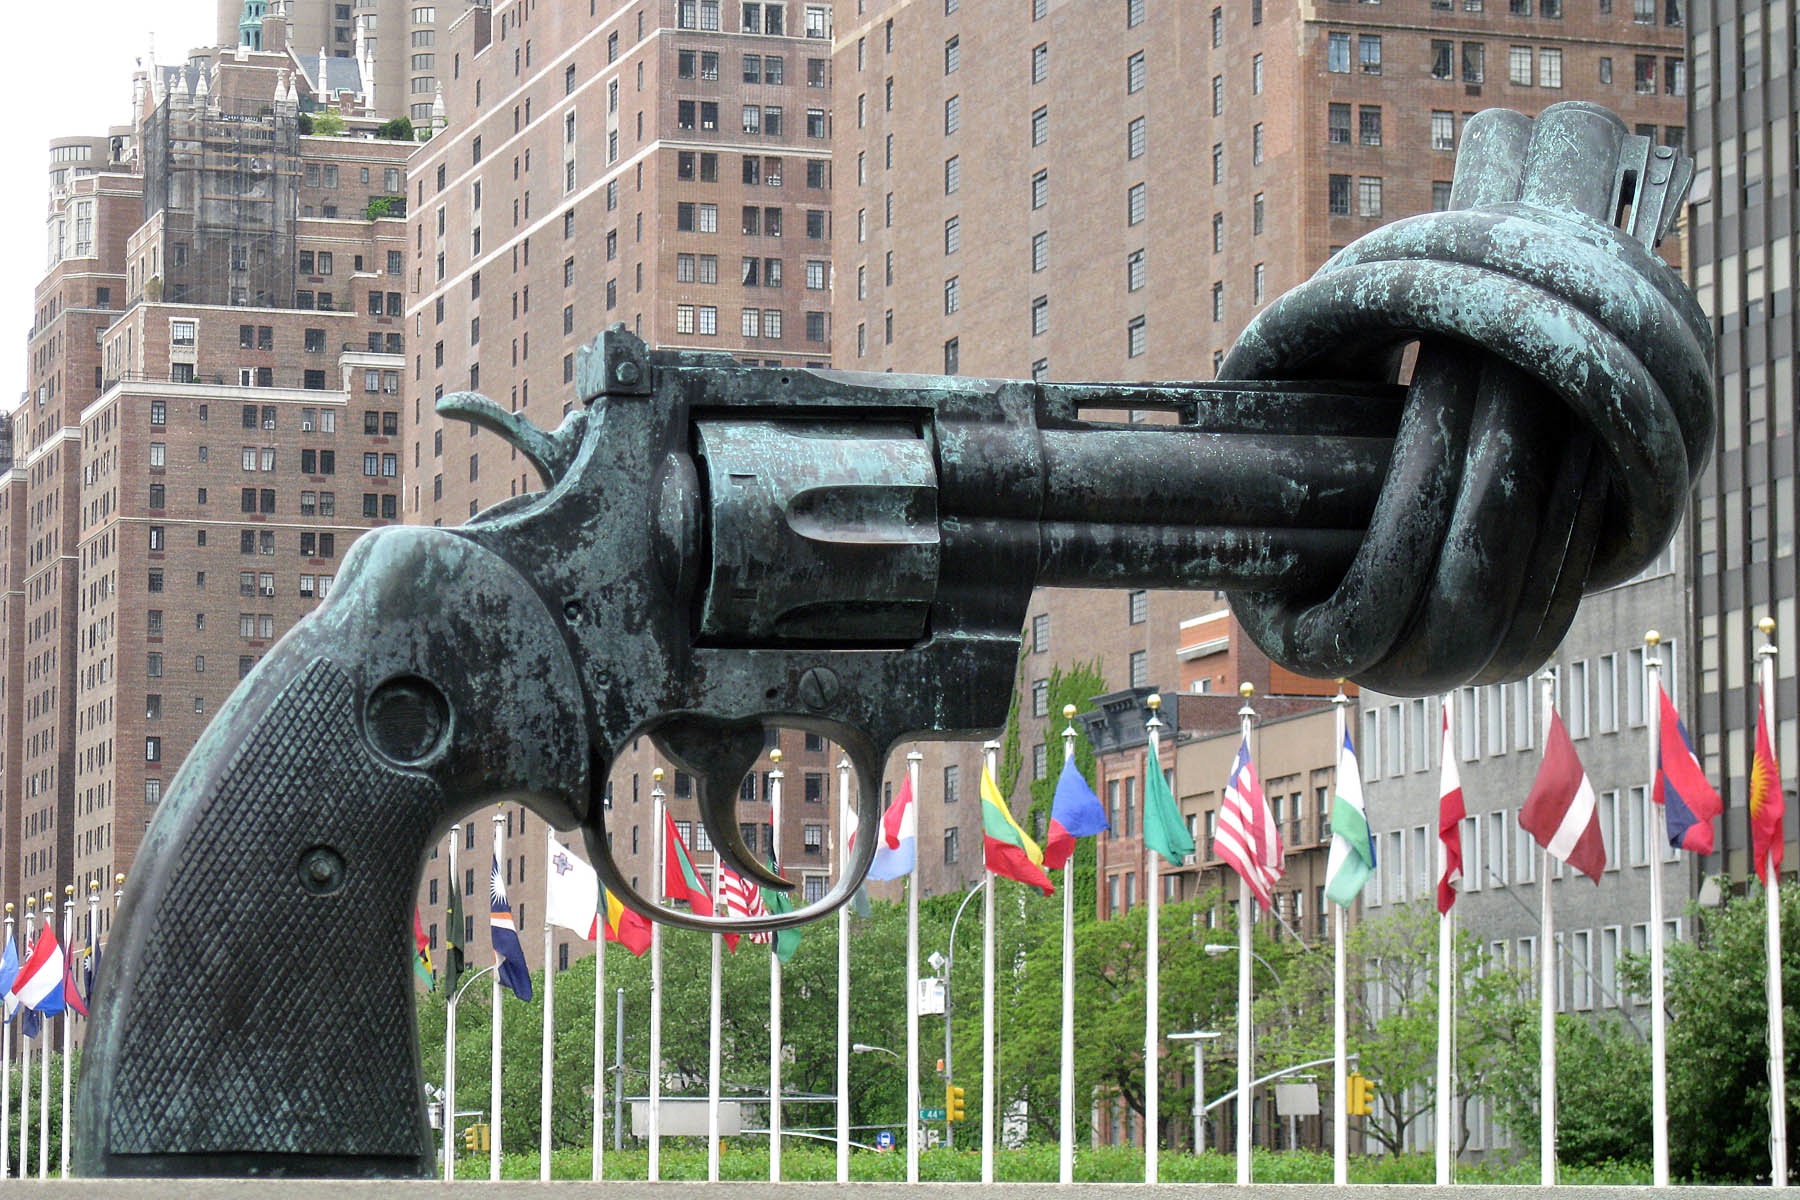 Non–Violence or The Knotted Gun by Carl Fredrik Reutersward, UN Headquarters, New York (Photo by mira66, CC BY-NC-SA 2.0)